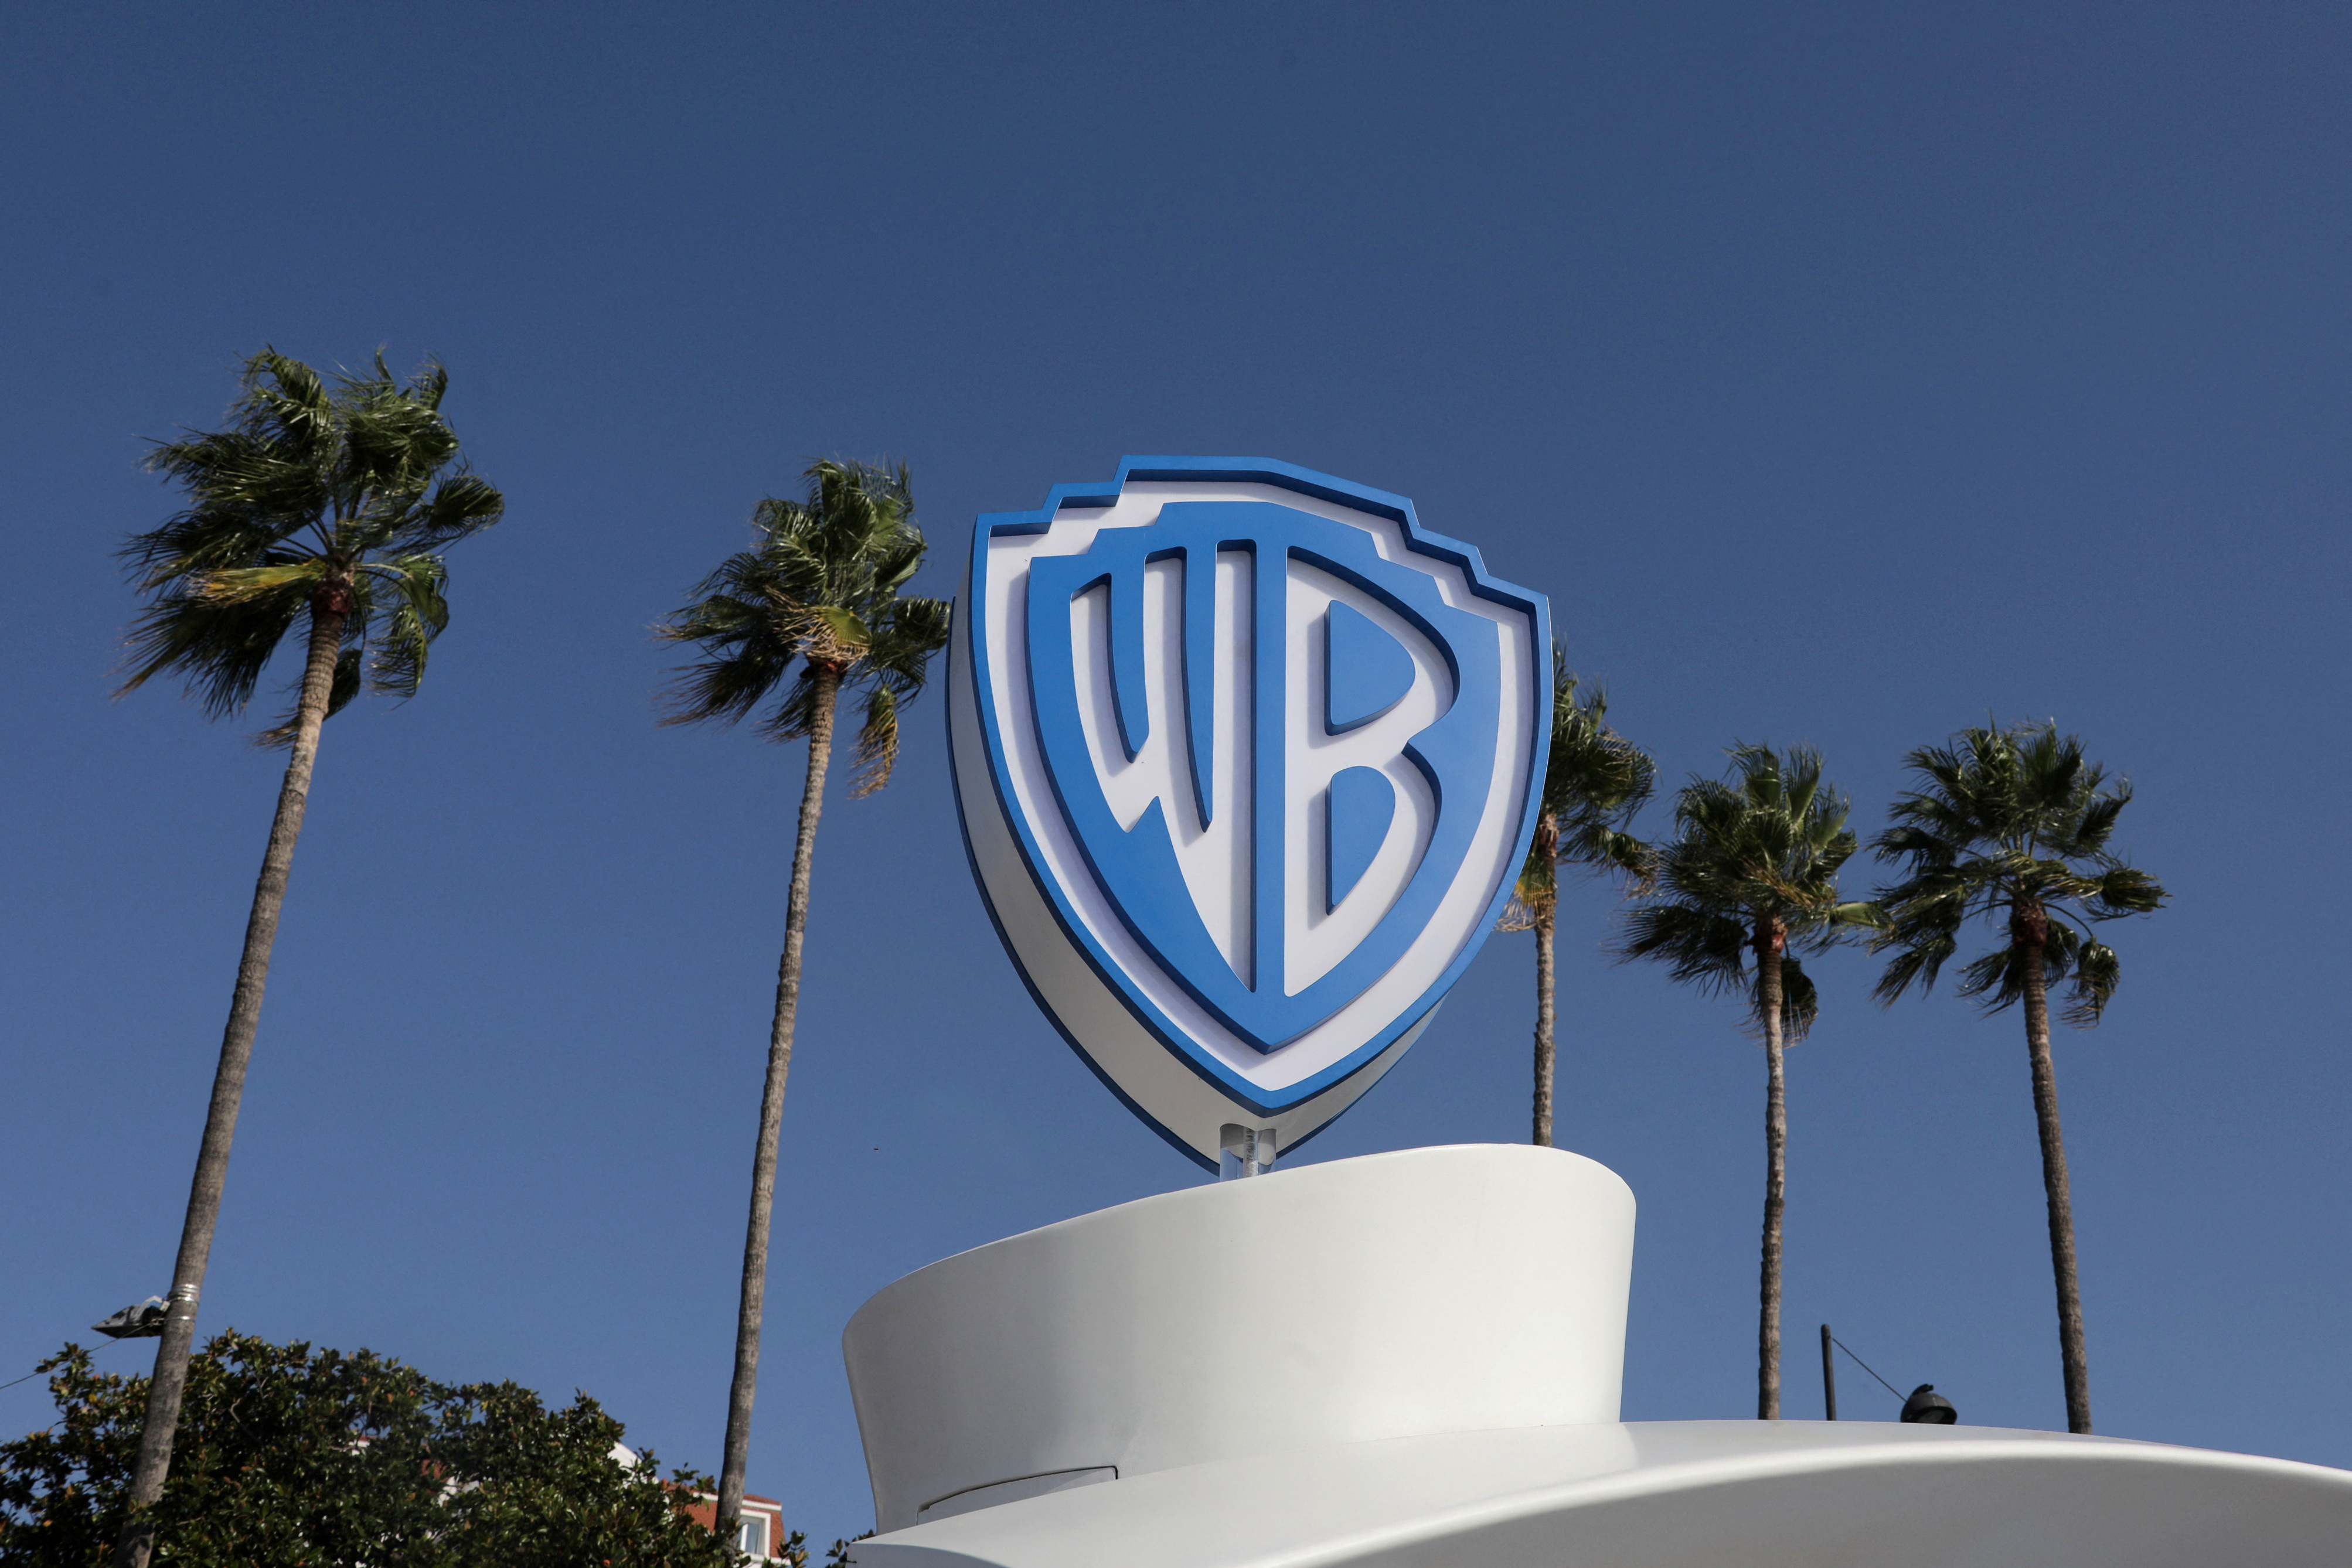 Warner Bros. Games To Shift Away From Standard Releases In Favor